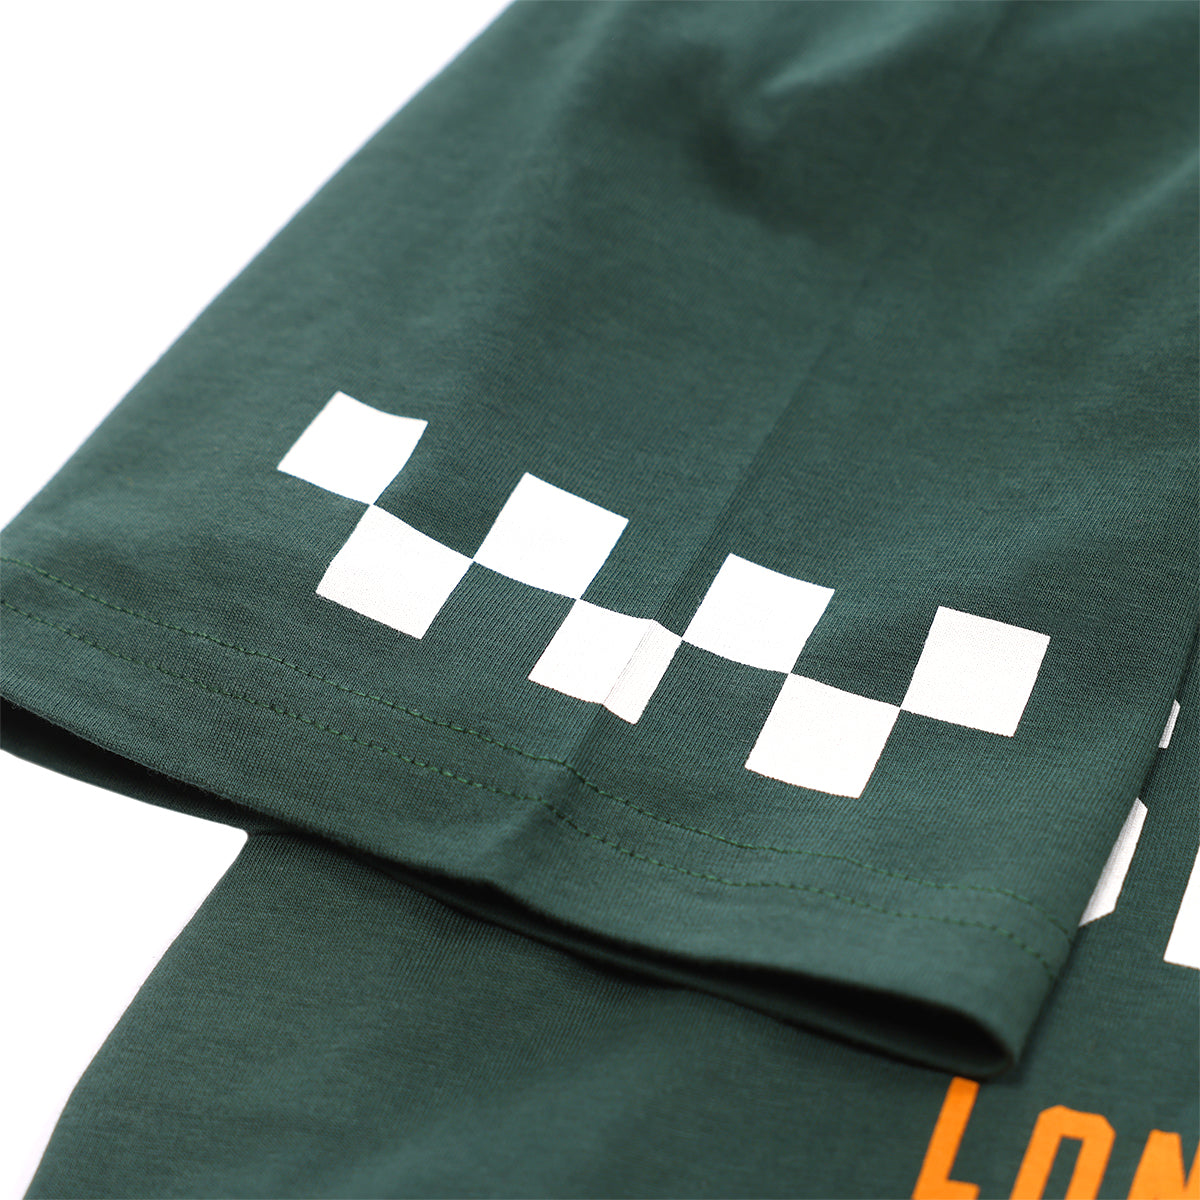 Fast Life Tee - Forest Green